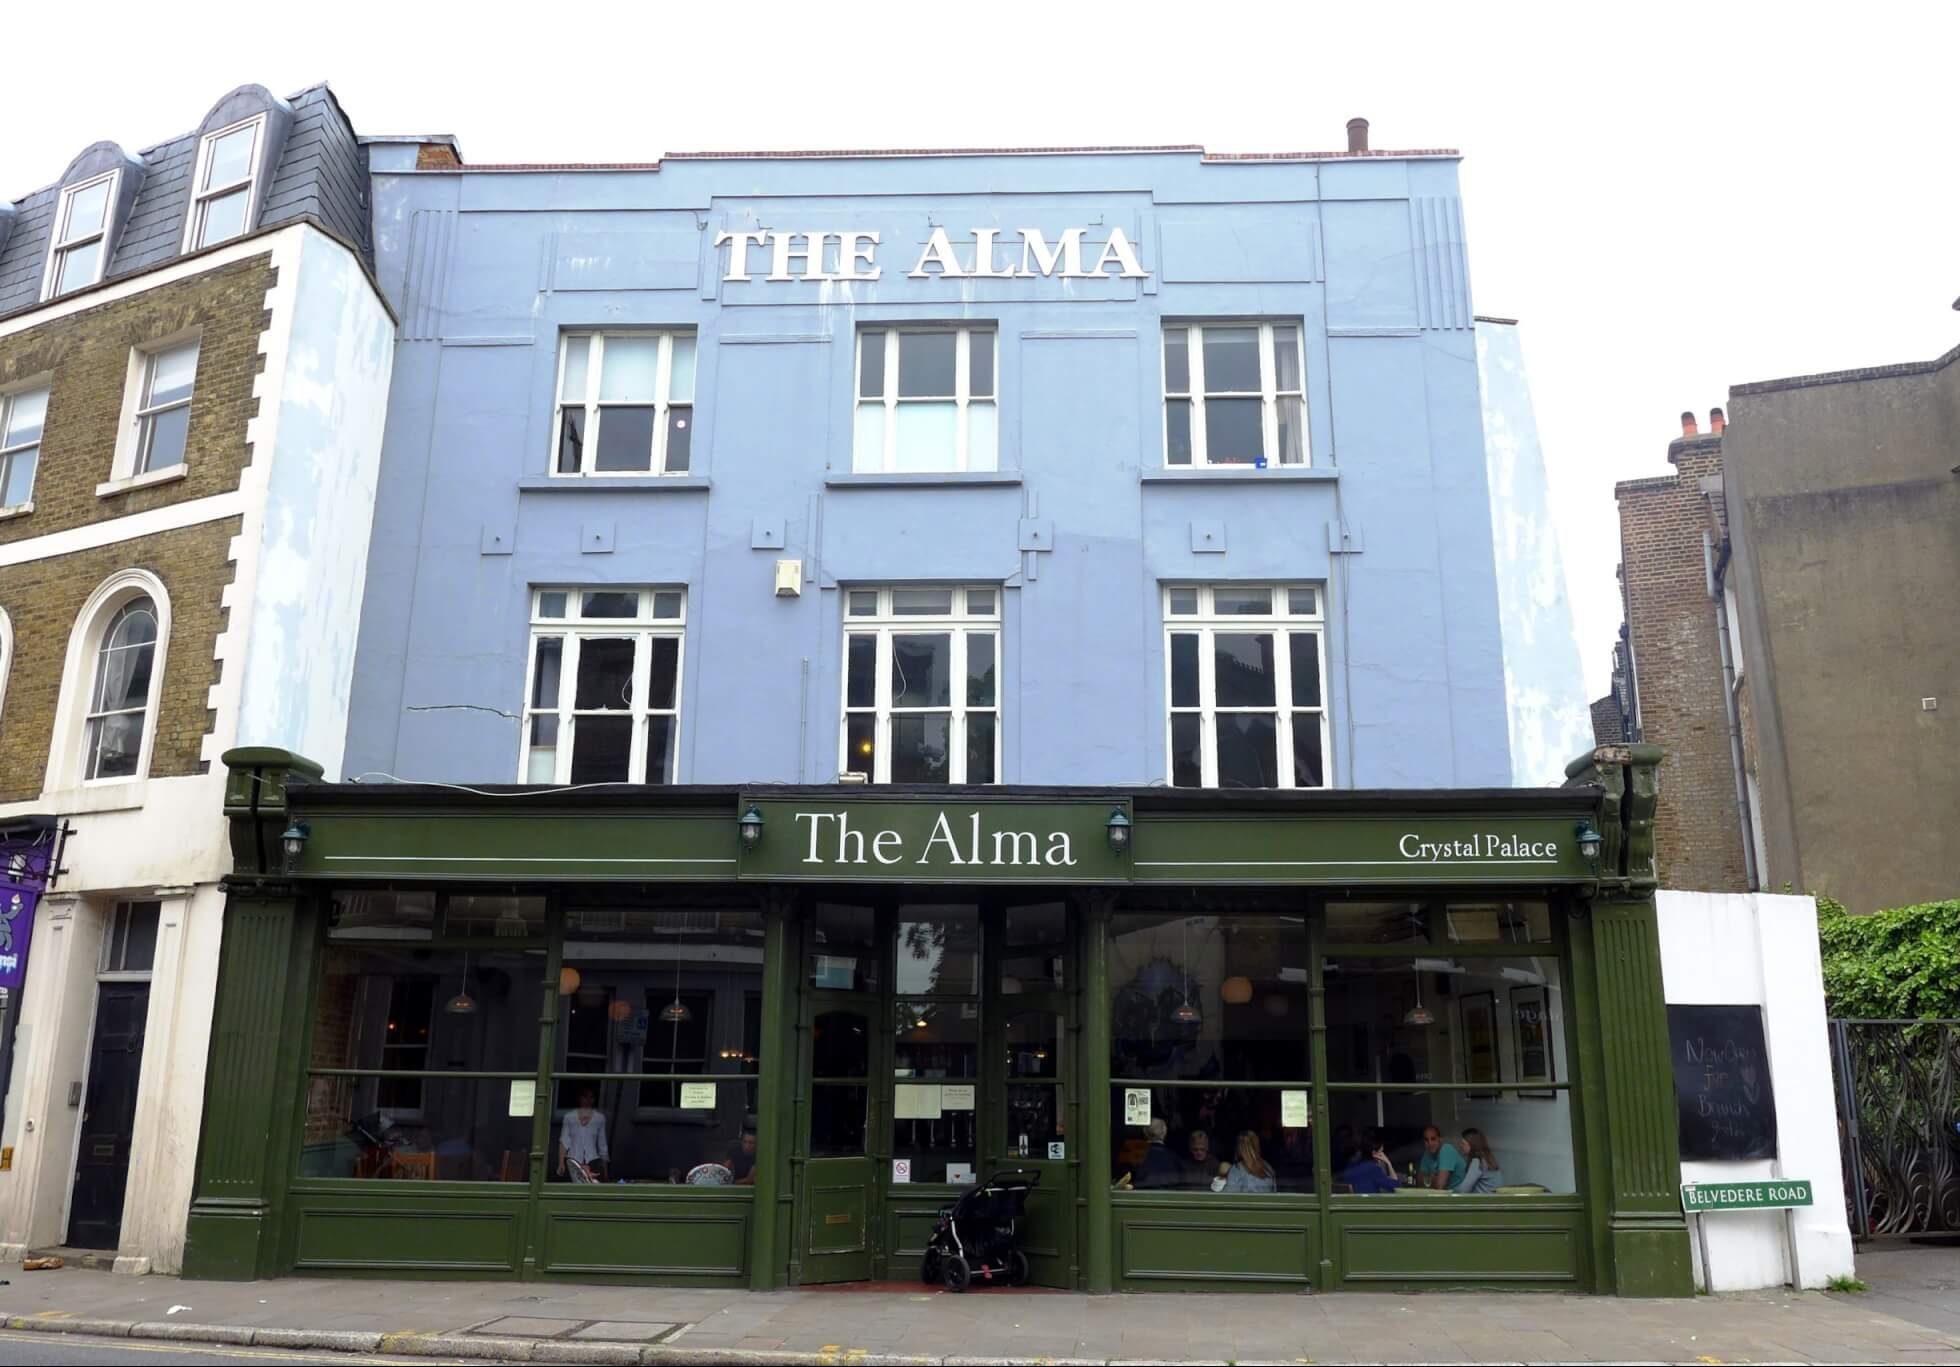 Ewan Munro - Alma, Crystal Palace, SE19
A pub in Crystal Palace, definitely attractive to the families.